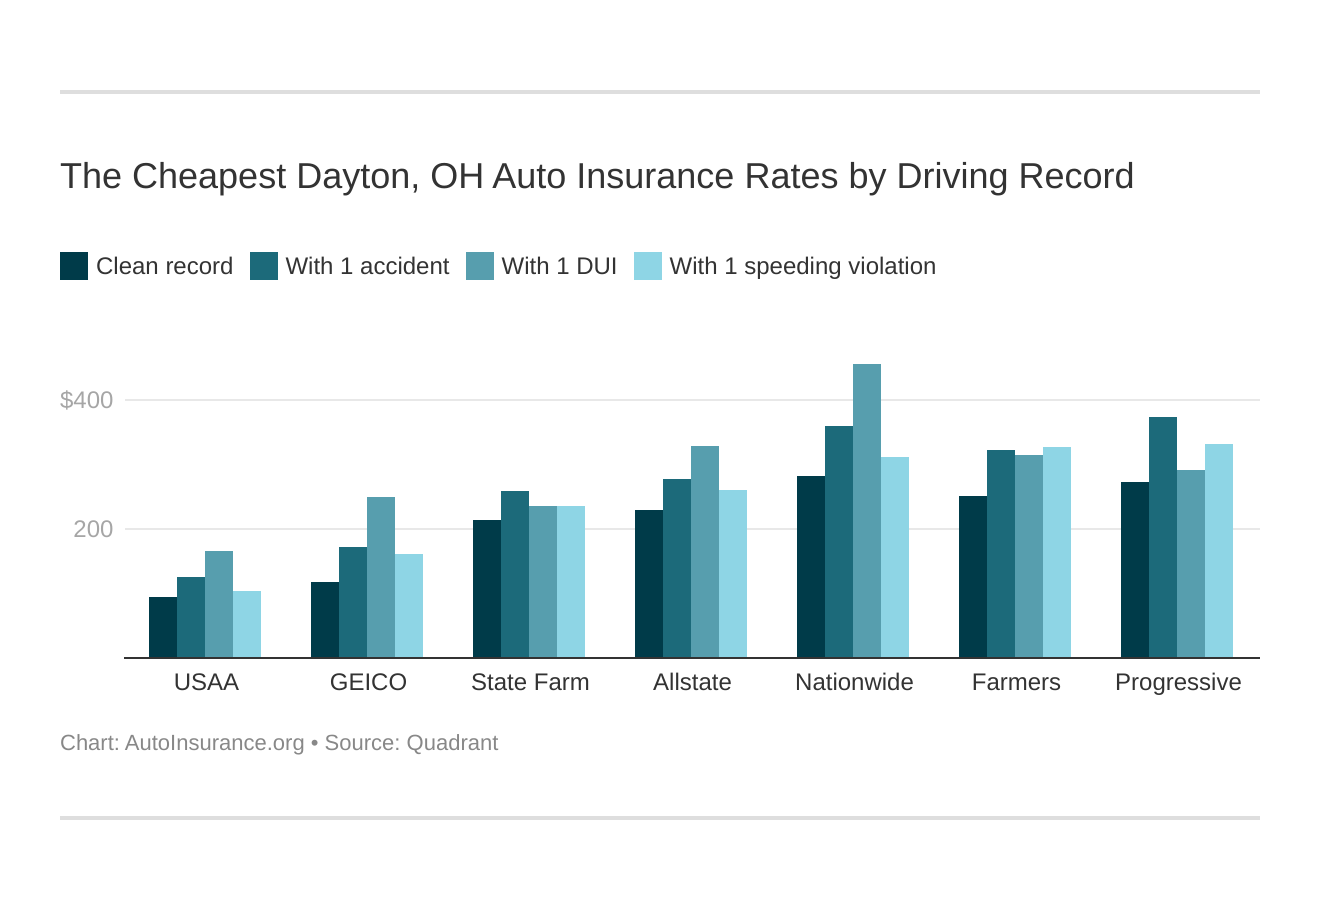 The Cheapest Dayton, OH Auto Insurance Rates by Driving Record